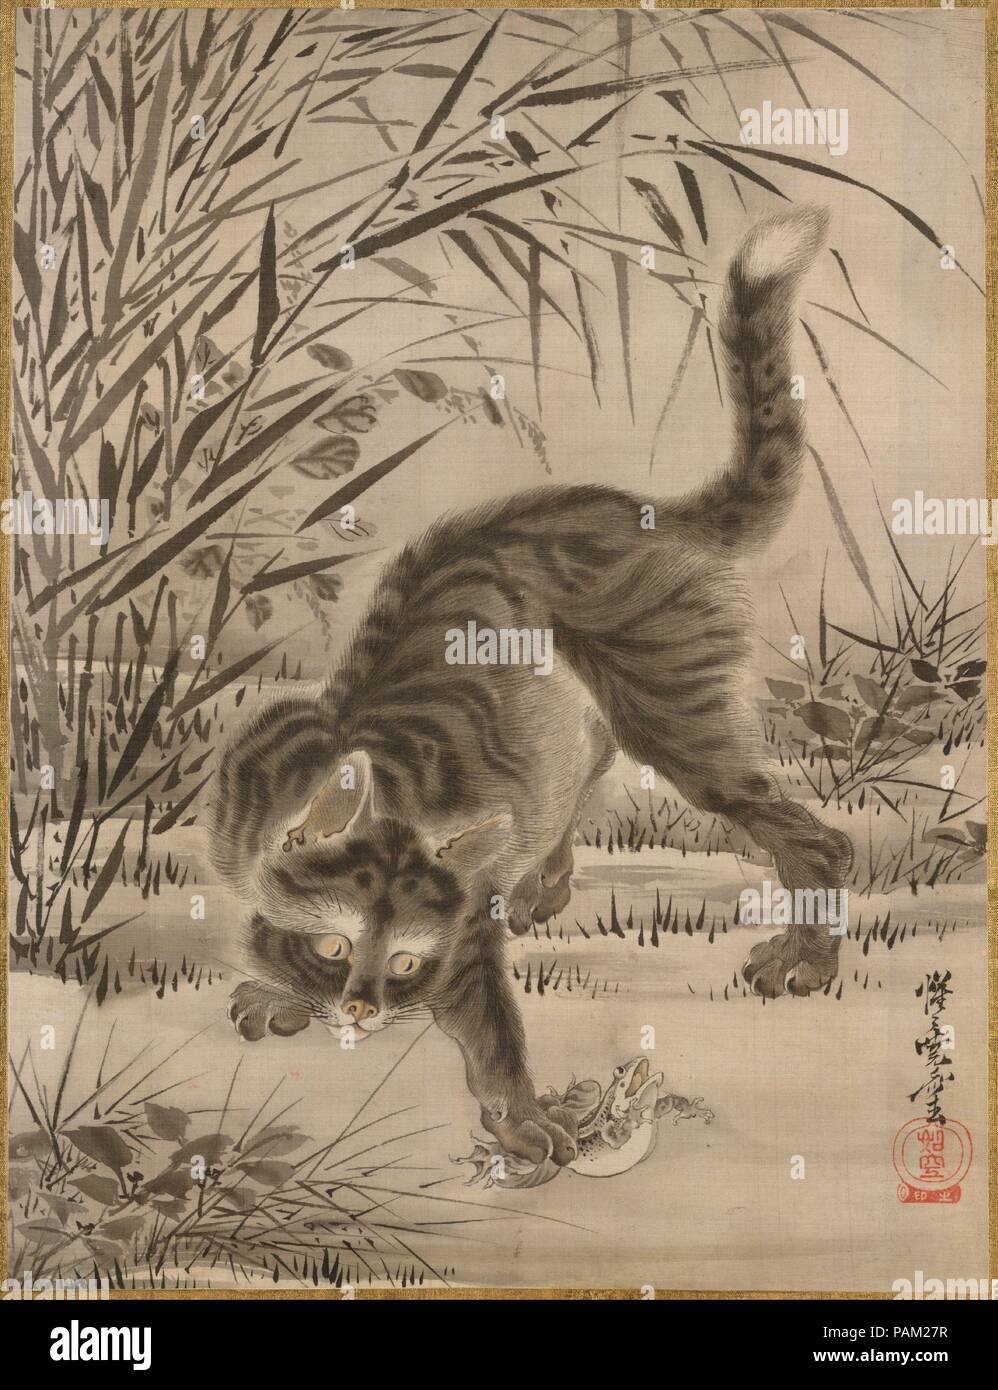 Cat Catching a Frog. Artist: Kawanabe Kyosai (Japanese, 1831-1889). Culture: Japan. Dimensions: 14 1/8 x 10 5/8 in. (35.9 x 27 cm). Date: ca. 1887. Museum: Metropolitan Museum of Art, New York, USA. Stock Photo